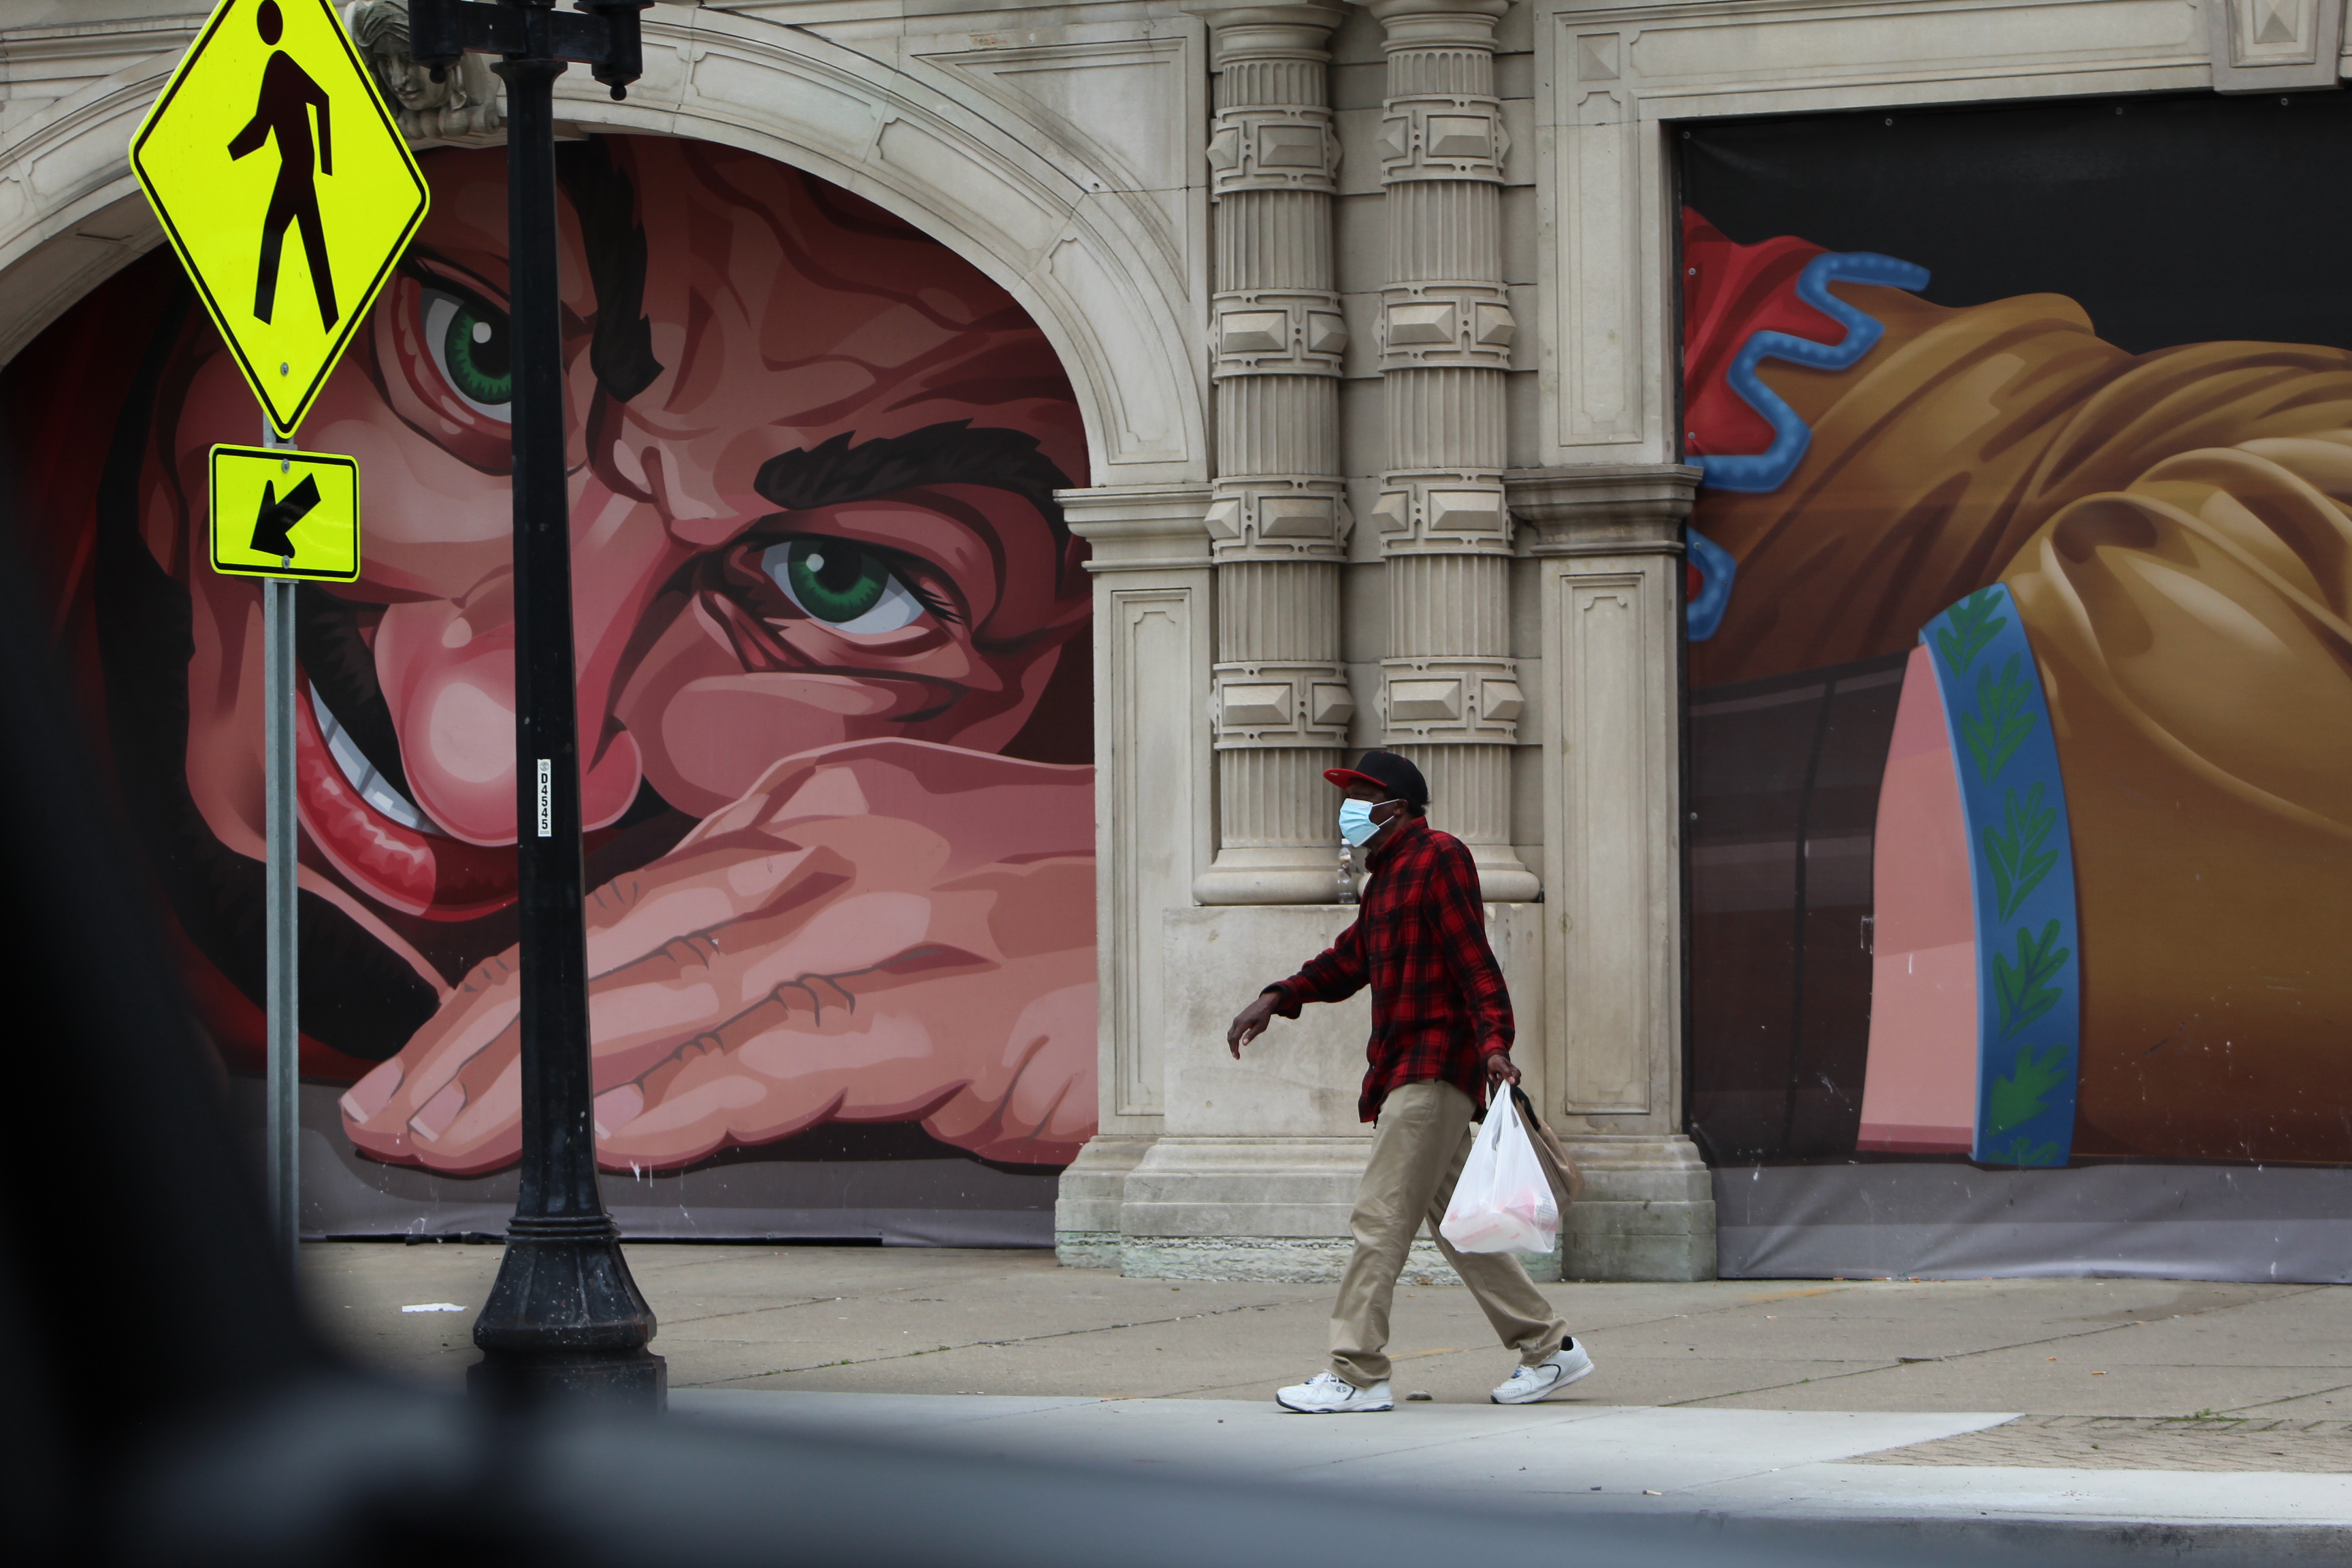 A man walks past the mural on the north end of Dayton Arcade after finishing shopping at Stop-N-Save Foods on West Third Street in downtown Dayton.  Cornelius Frolik / Crew